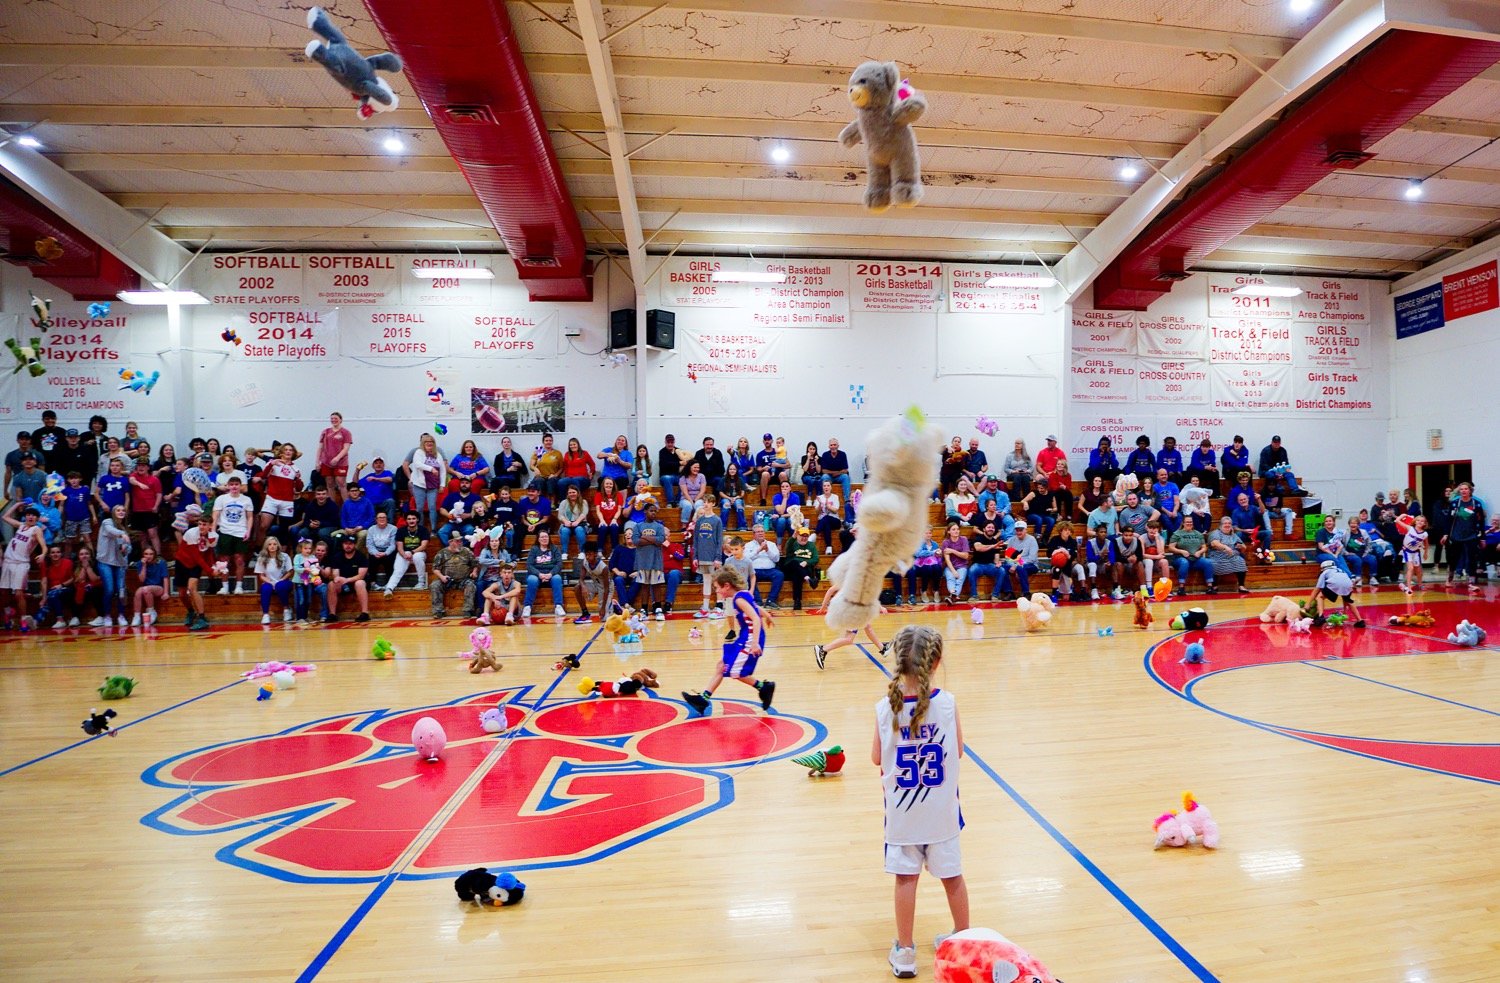 Between the girls and boys games, the Alba-Golden Youth Foundation collection of Toys for Tots saw a slew of stuffed animals and other fluffy, fun characters tossed onto the court. [see more shots, buy basketball photos]